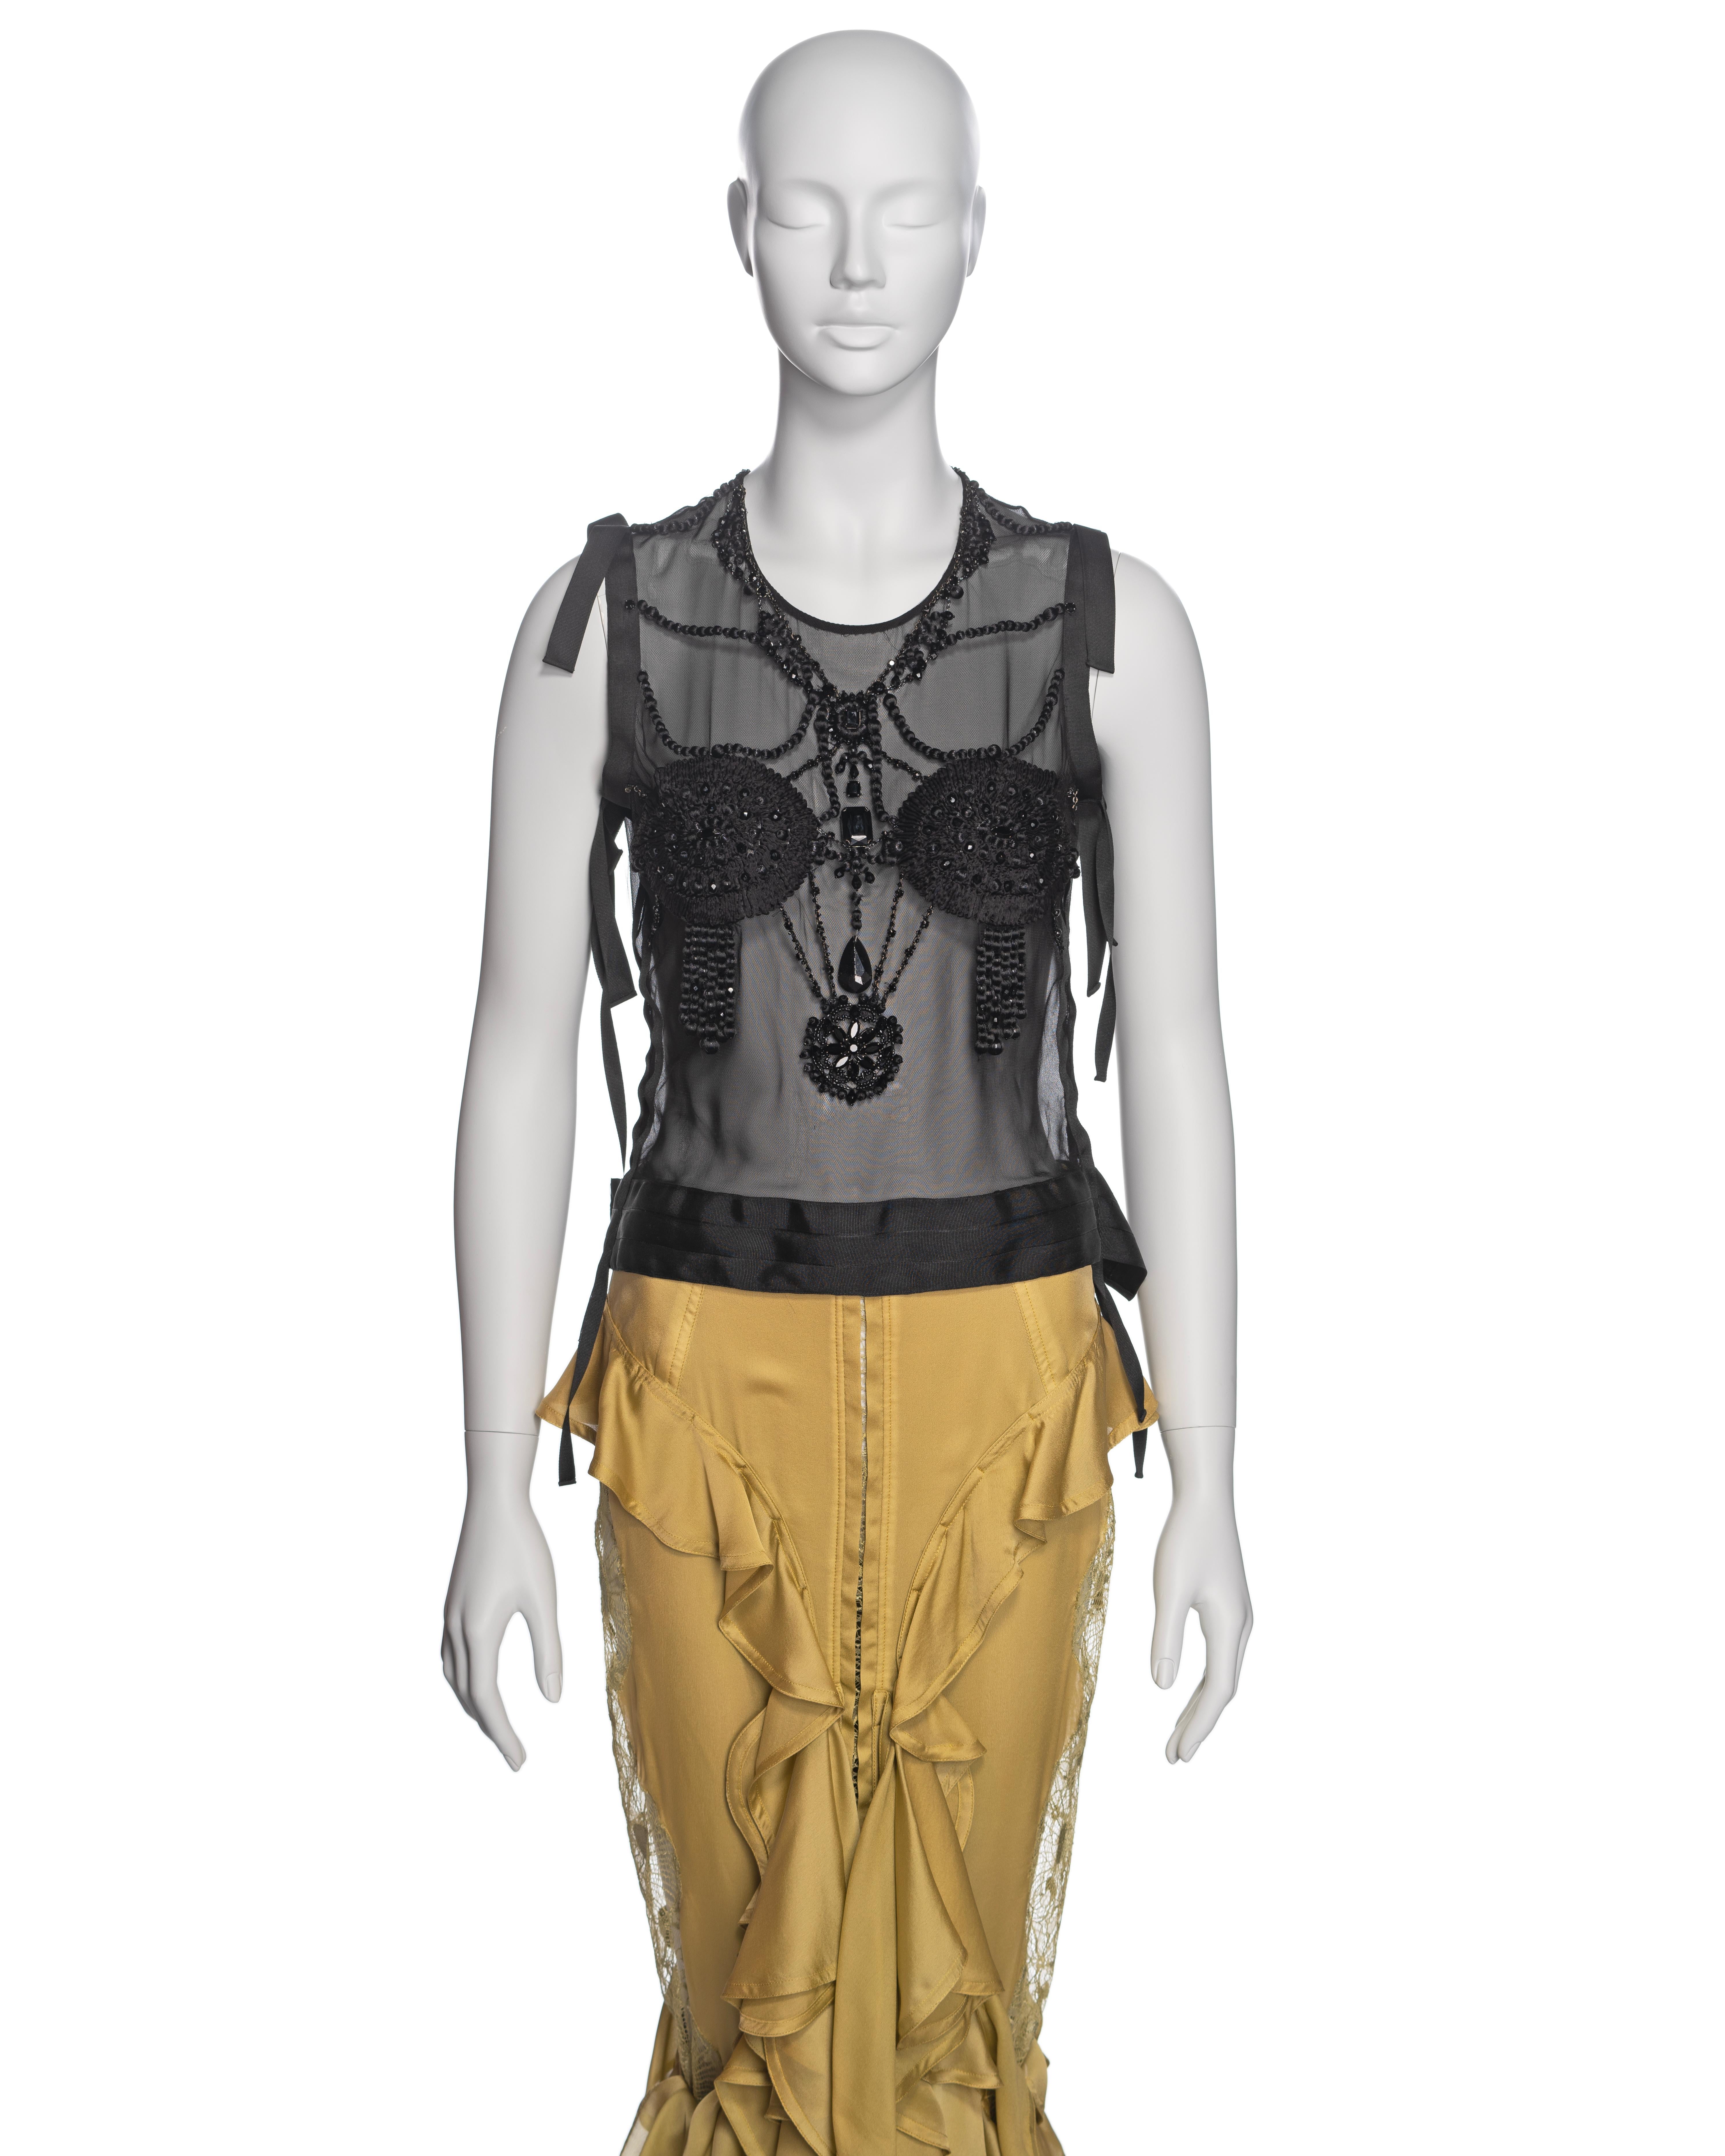 Women's Yves Saint Laurent by Tom Ford Embellished Top and Silk Skirt Ensemble, FW 2003 For Sale